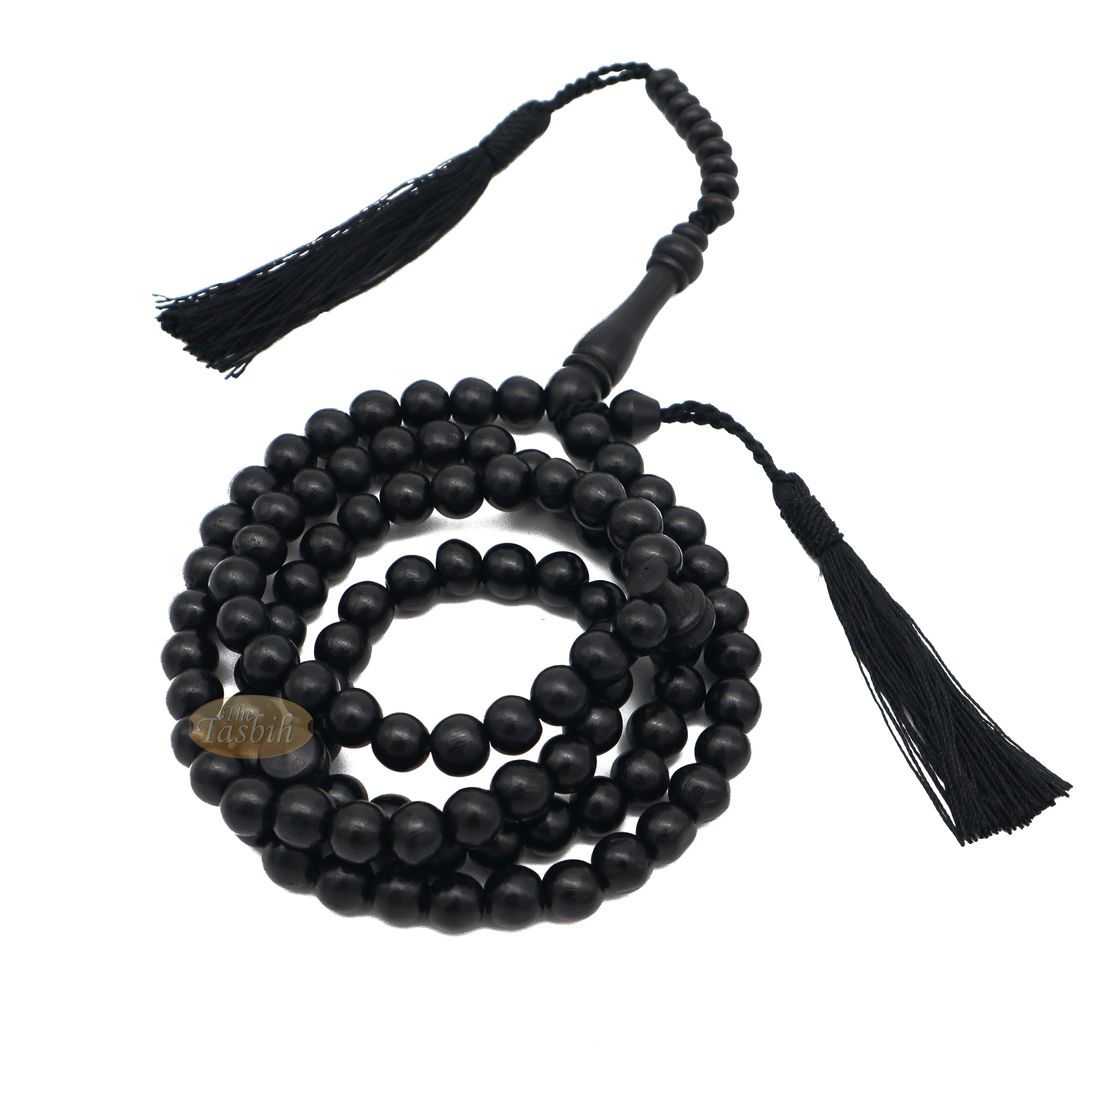 Natural Handcrafted 9mm Black Beads Wooden Tasbih 99-beads with Black Tassel